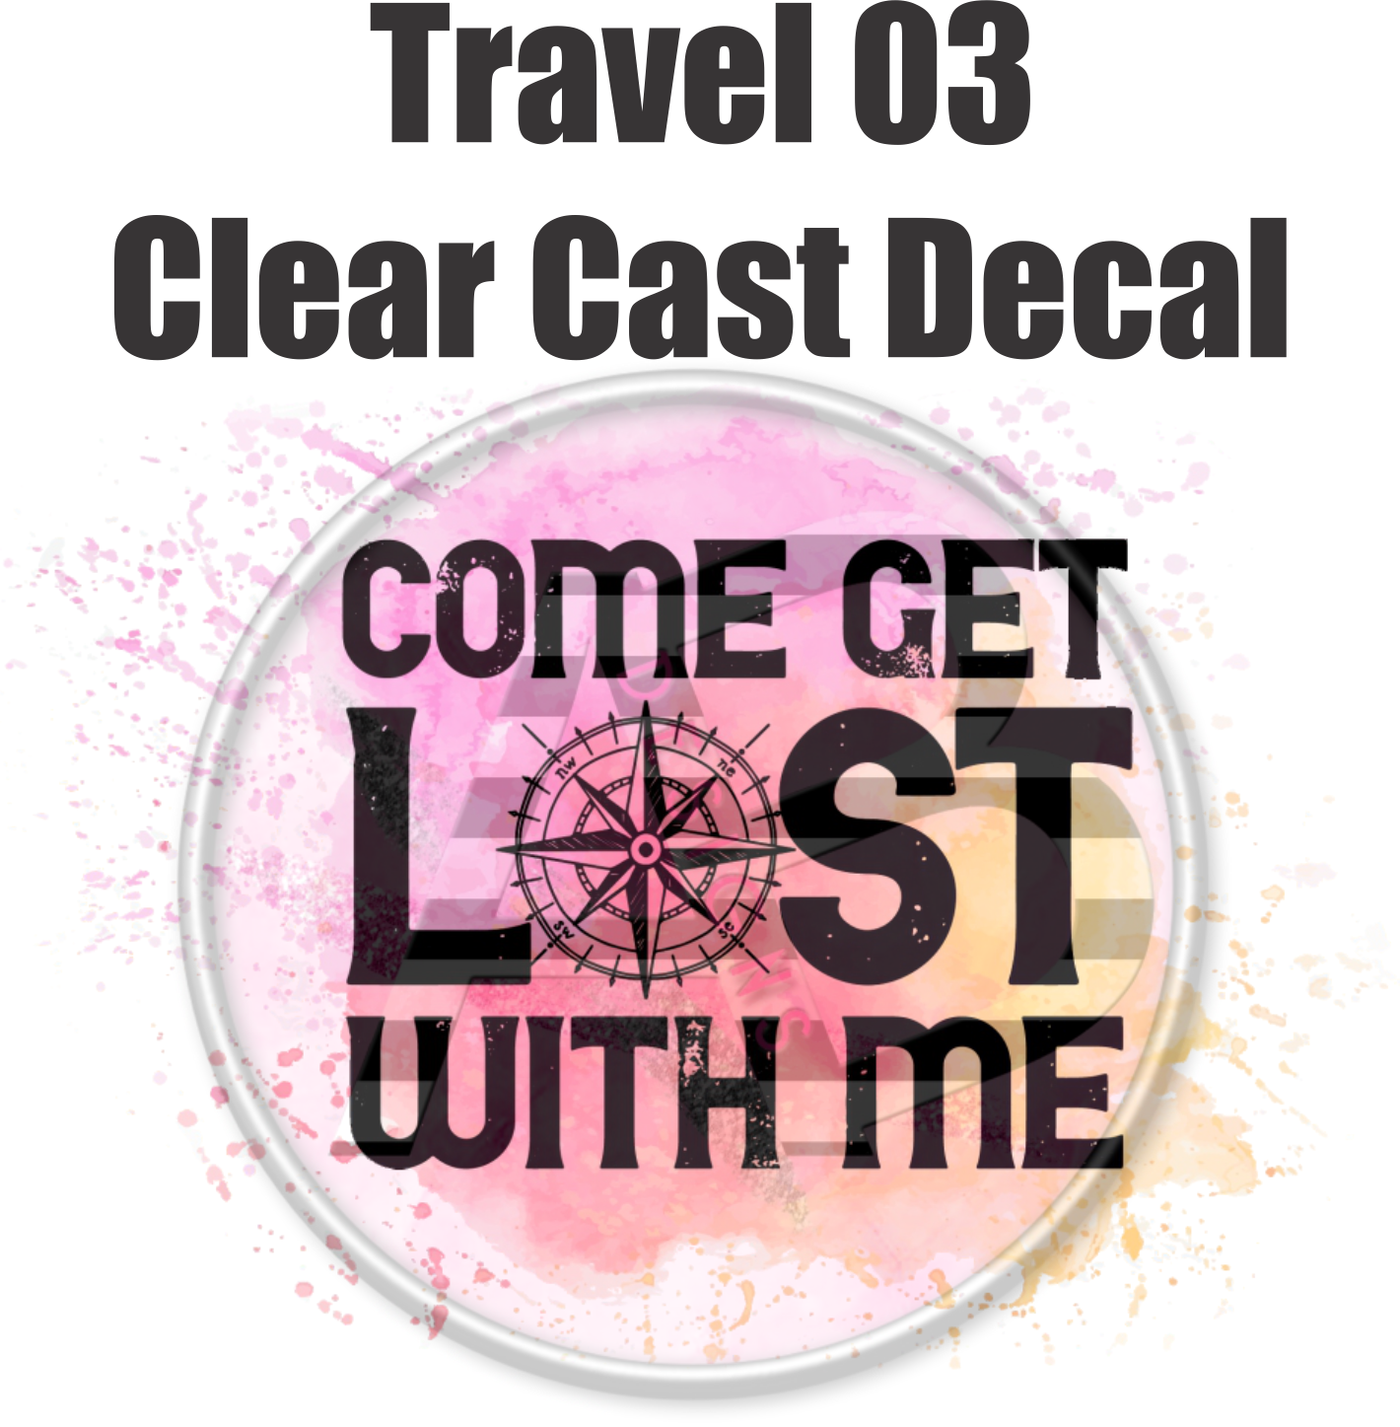 Travel 03 - Clear Cast Decal